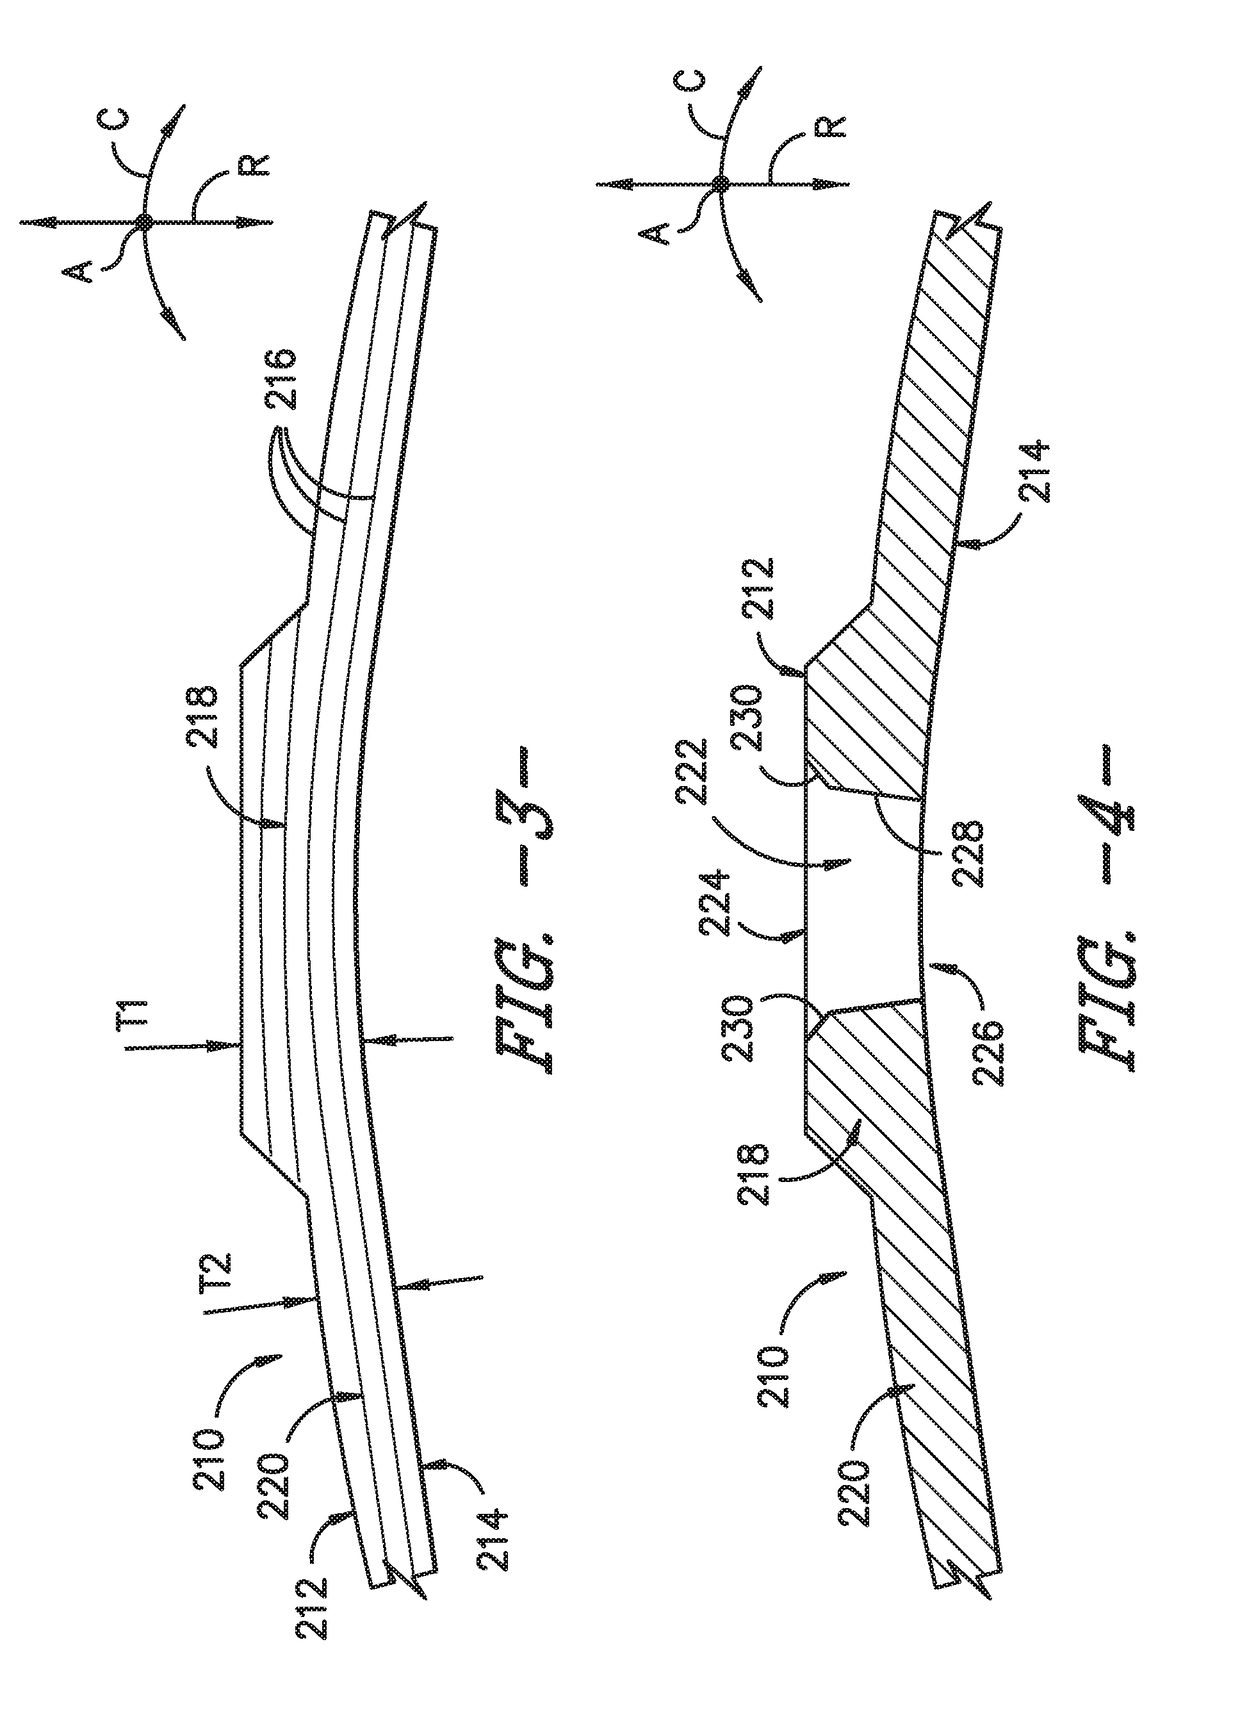 Flow path assemblies for gas turbine engines and assembly methods therefore